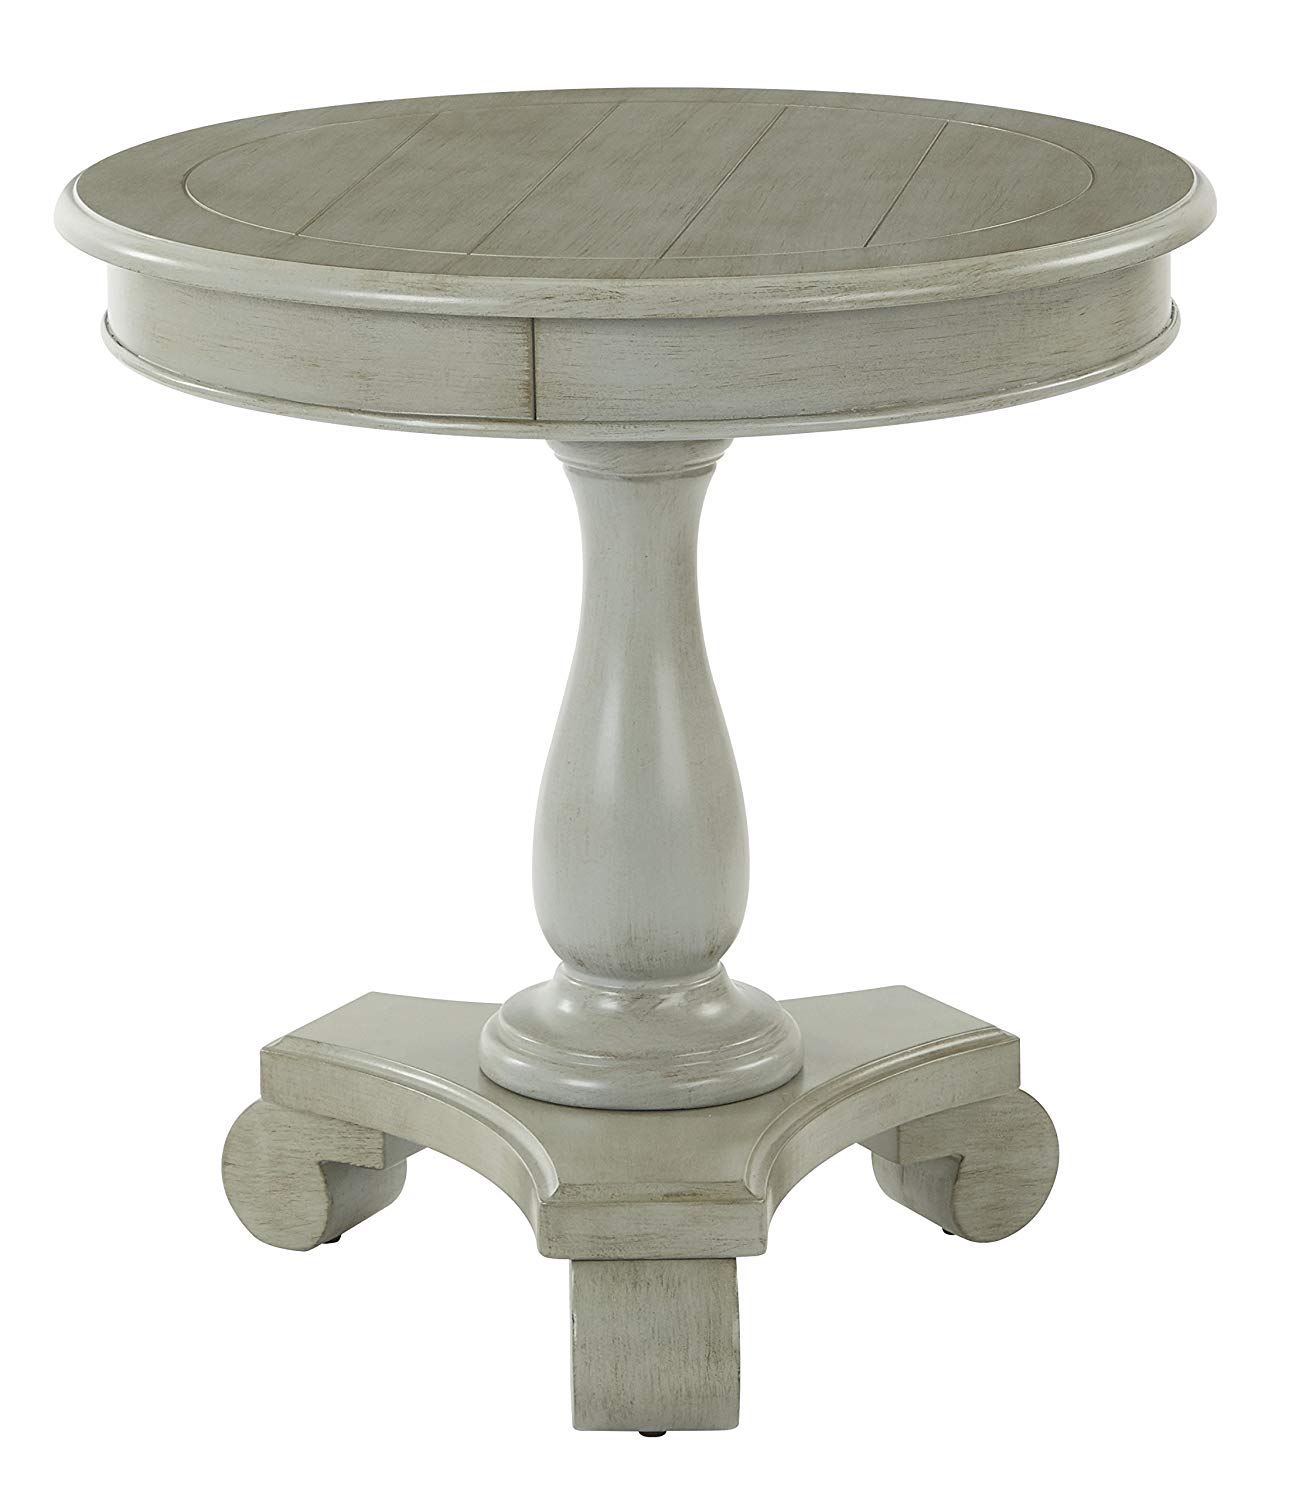 details about inspired bassett avlat osp avalon round accent table antique grey chinese bedside lamps colourful coffee copper real wood flooring canadian tire patio furniture sets